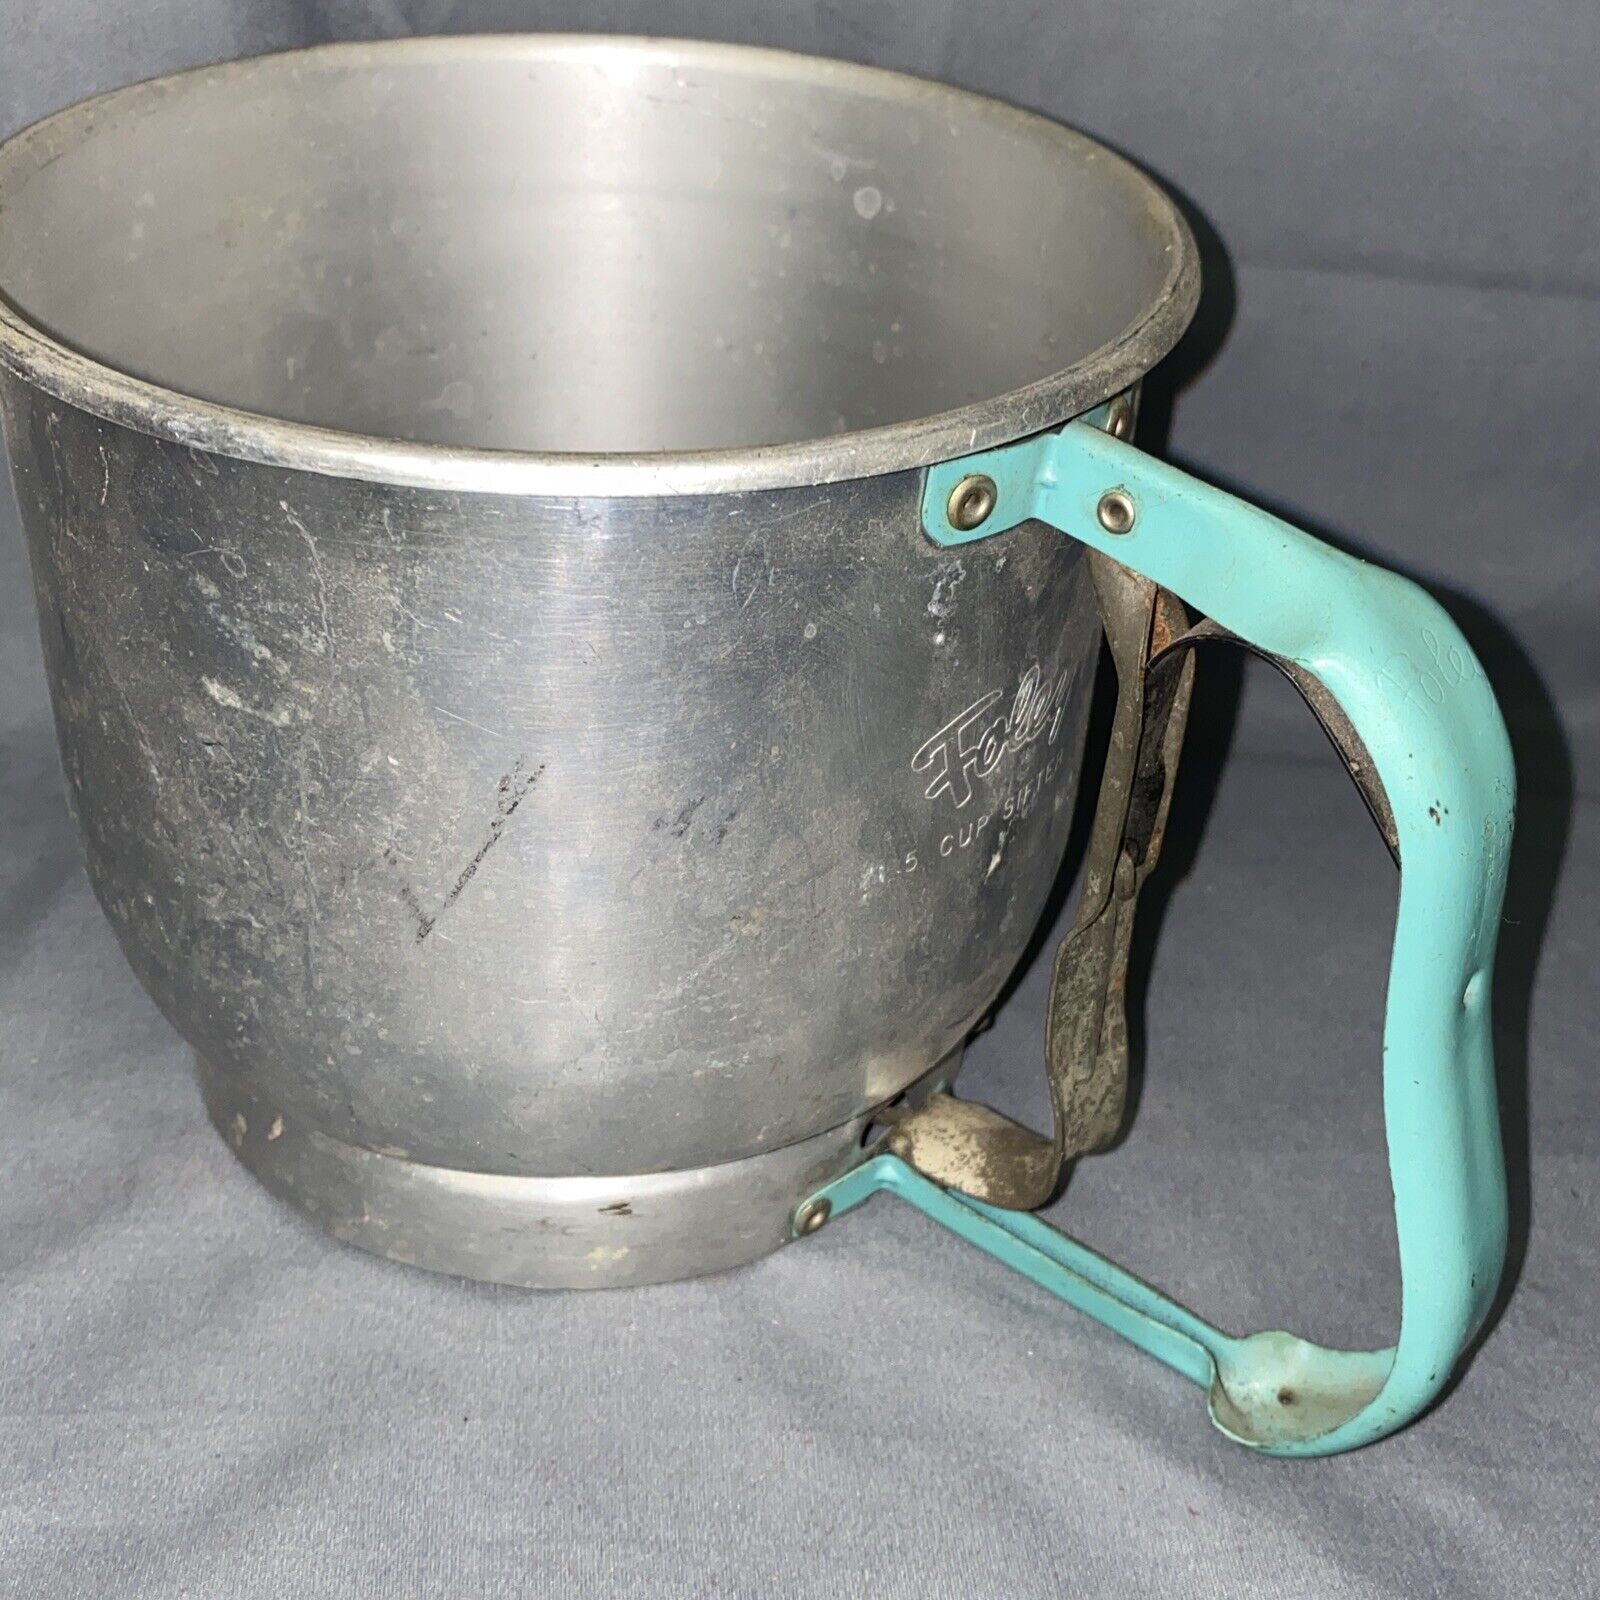 Foley 5 Cup Aluminum Sifter Teal Green Turquoise Handle Made in USA Vintage